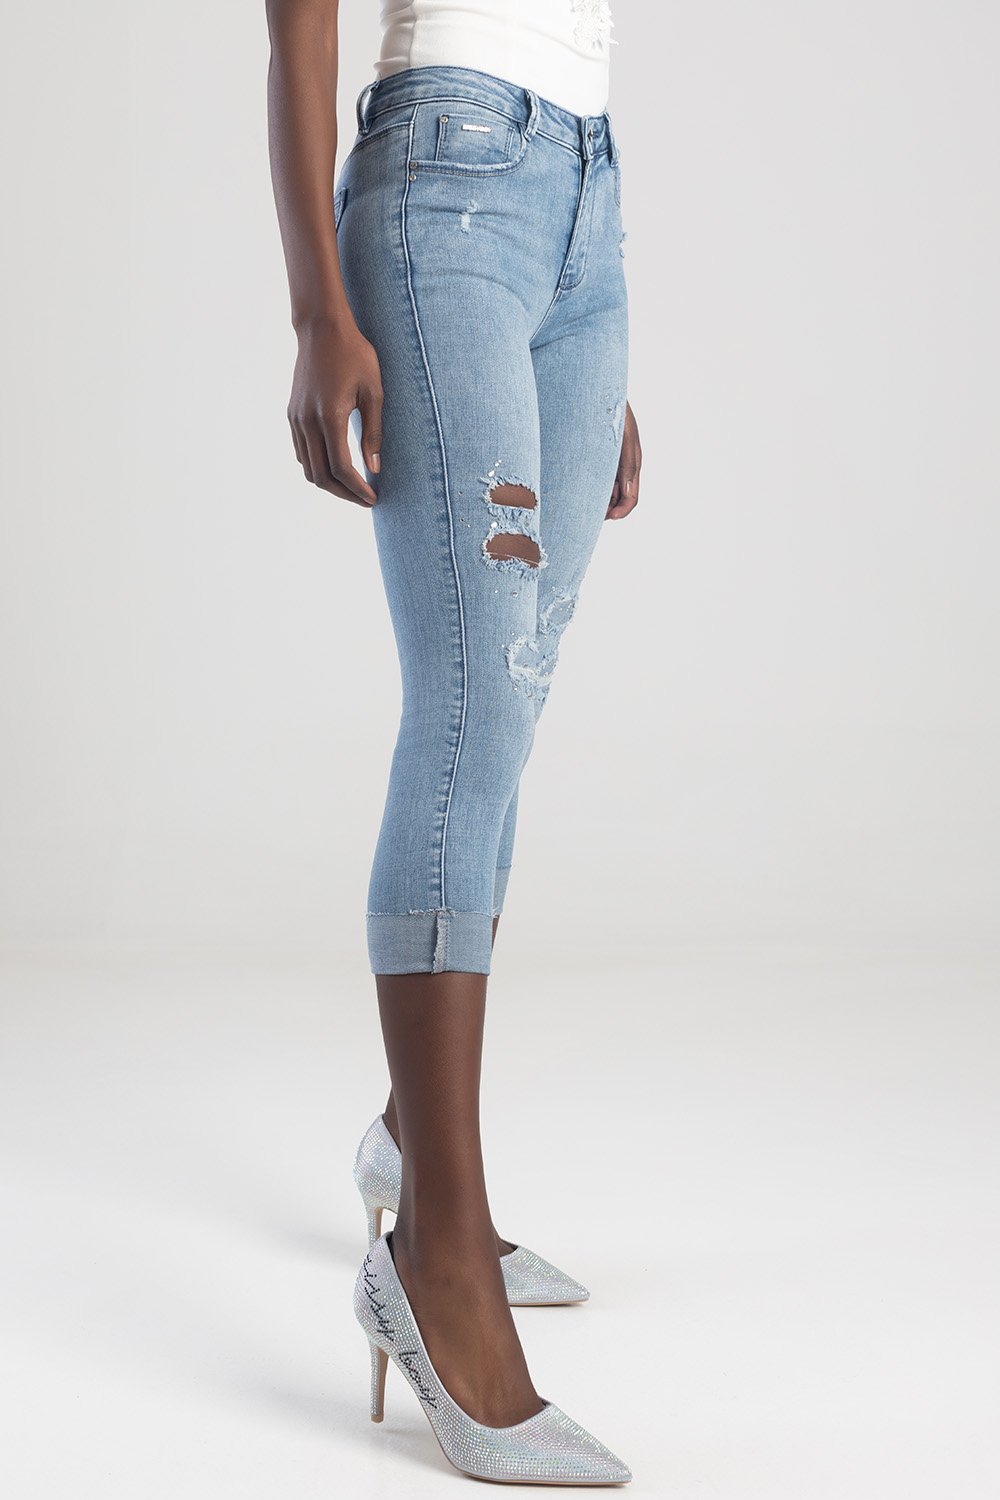 Axel Mid Waist Capri Jean With Rip And Repair - Light Blue